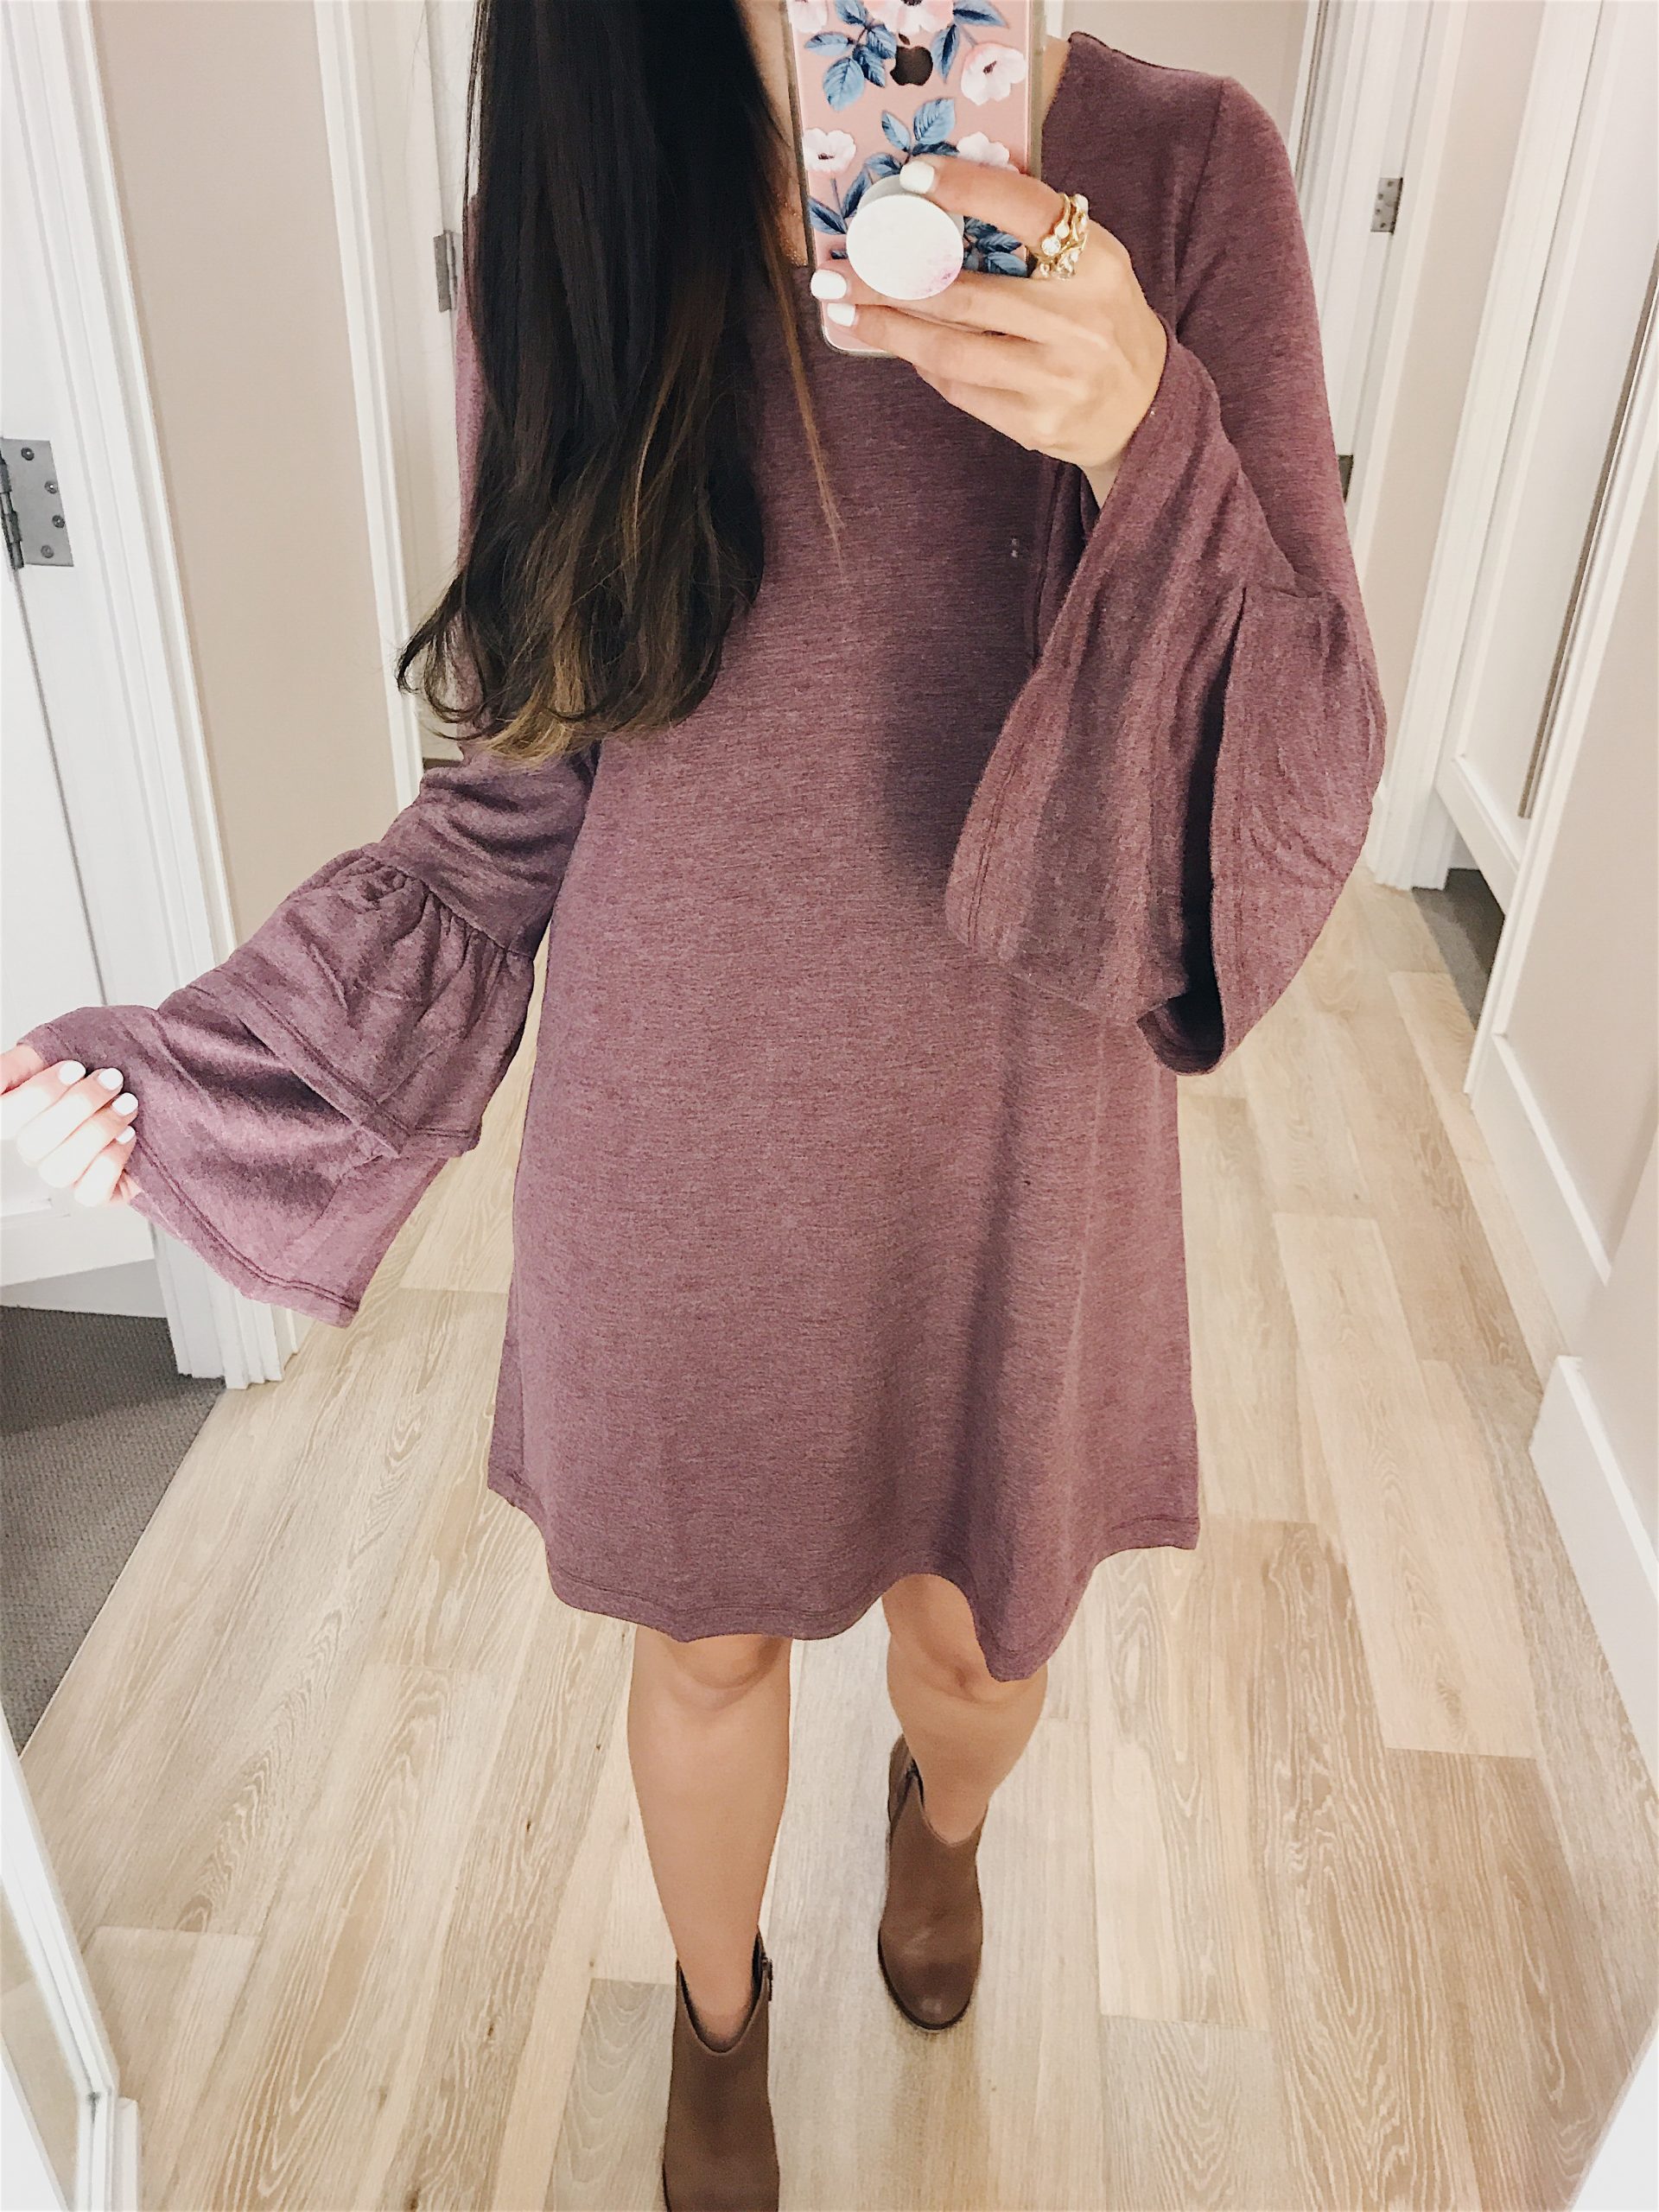 Anna Monteiro of Blushing Rose STyle blog wearing cute fall outfit: dress with bell sleeves and booties